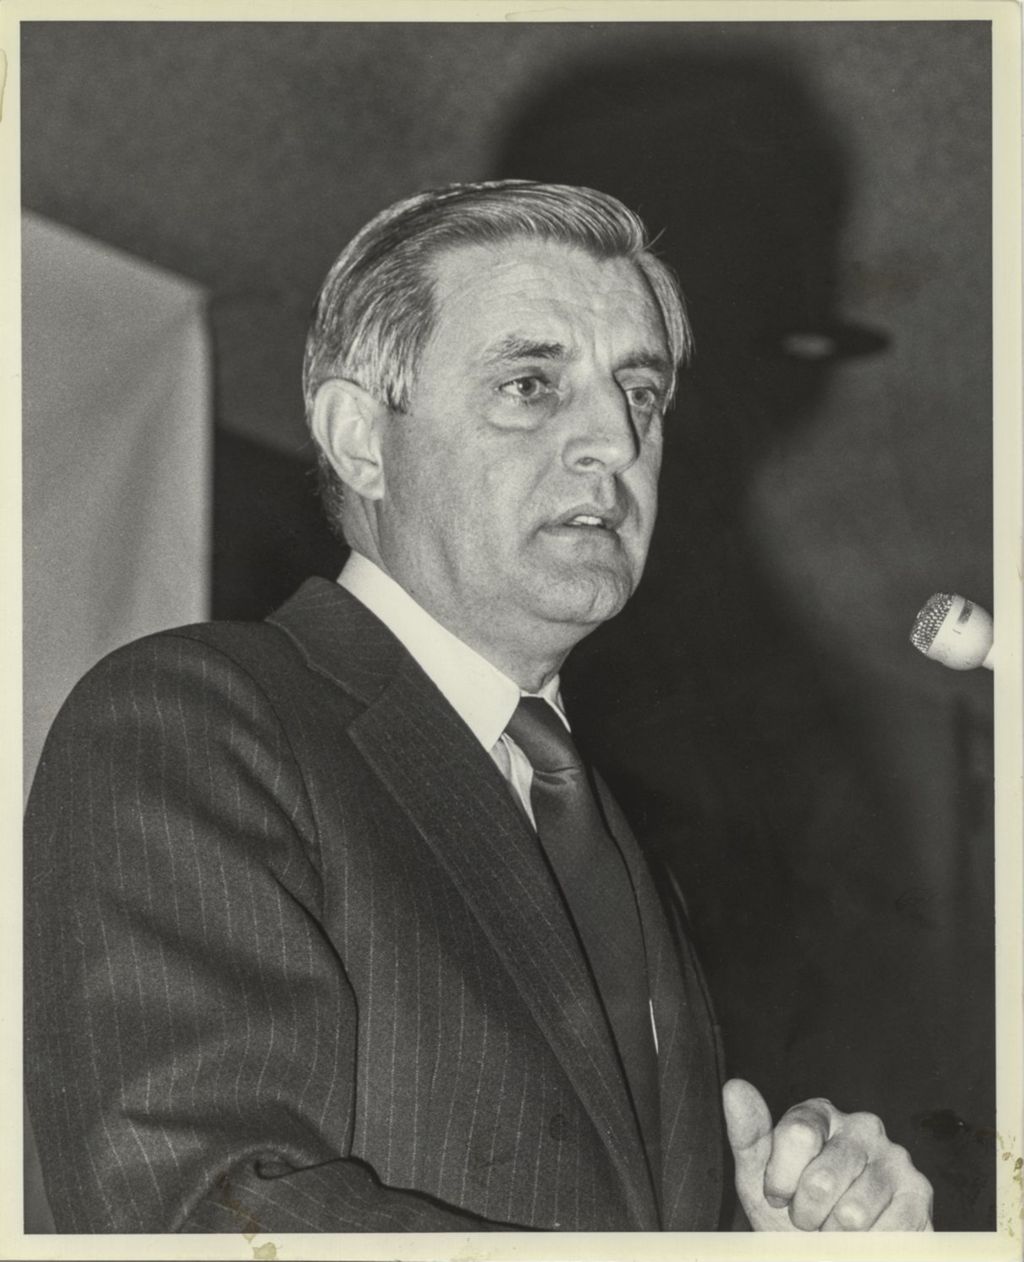 Walter Mondale speaking at a campaign event